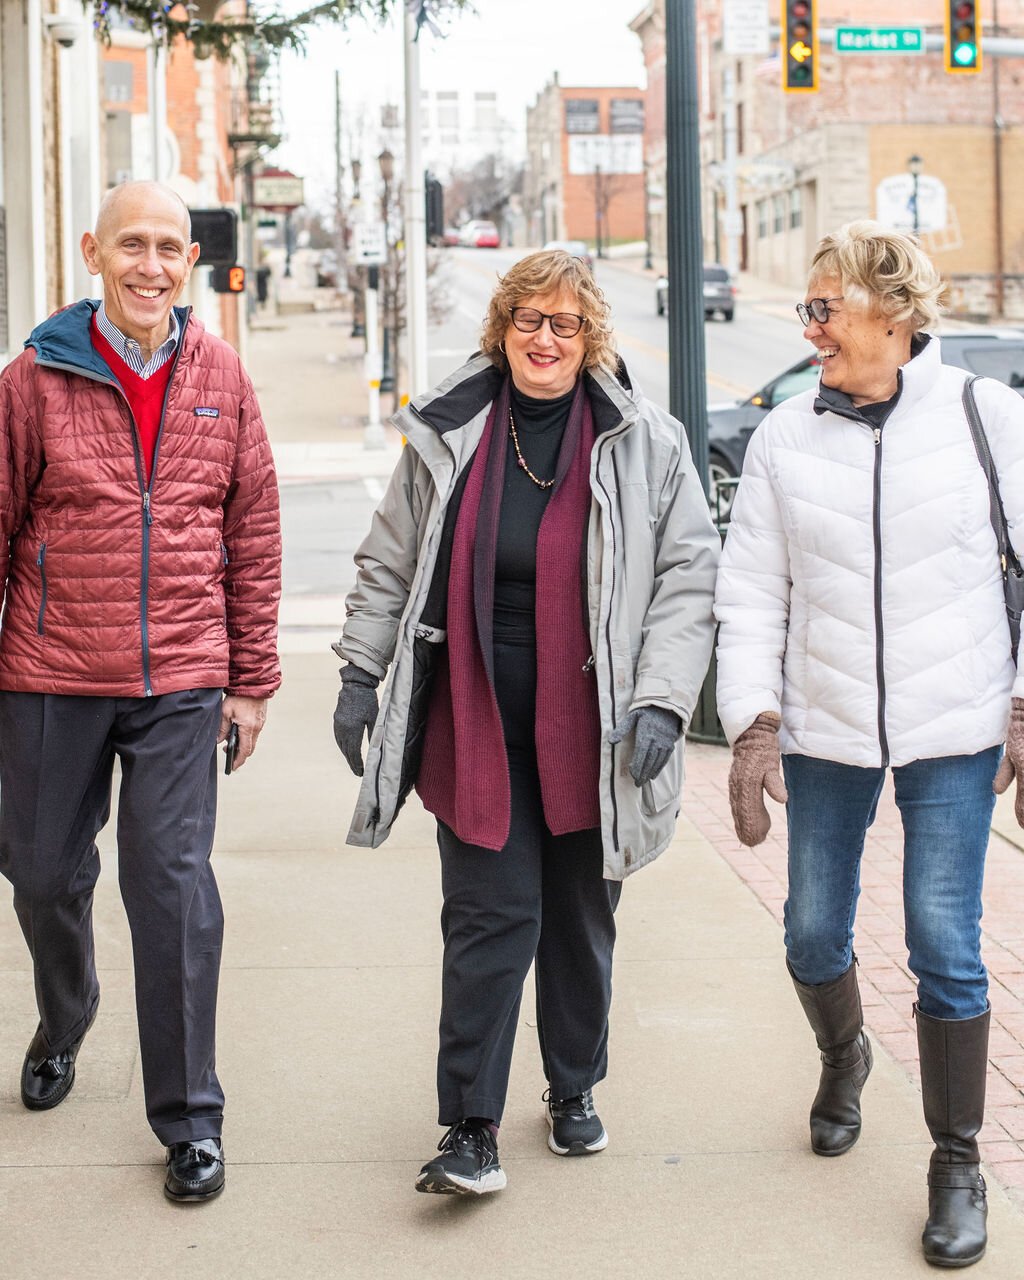 Retirees (left to right) Dave Haist, Jan Roland, and Beverly Vanderpool walk through Downtown Wabash.